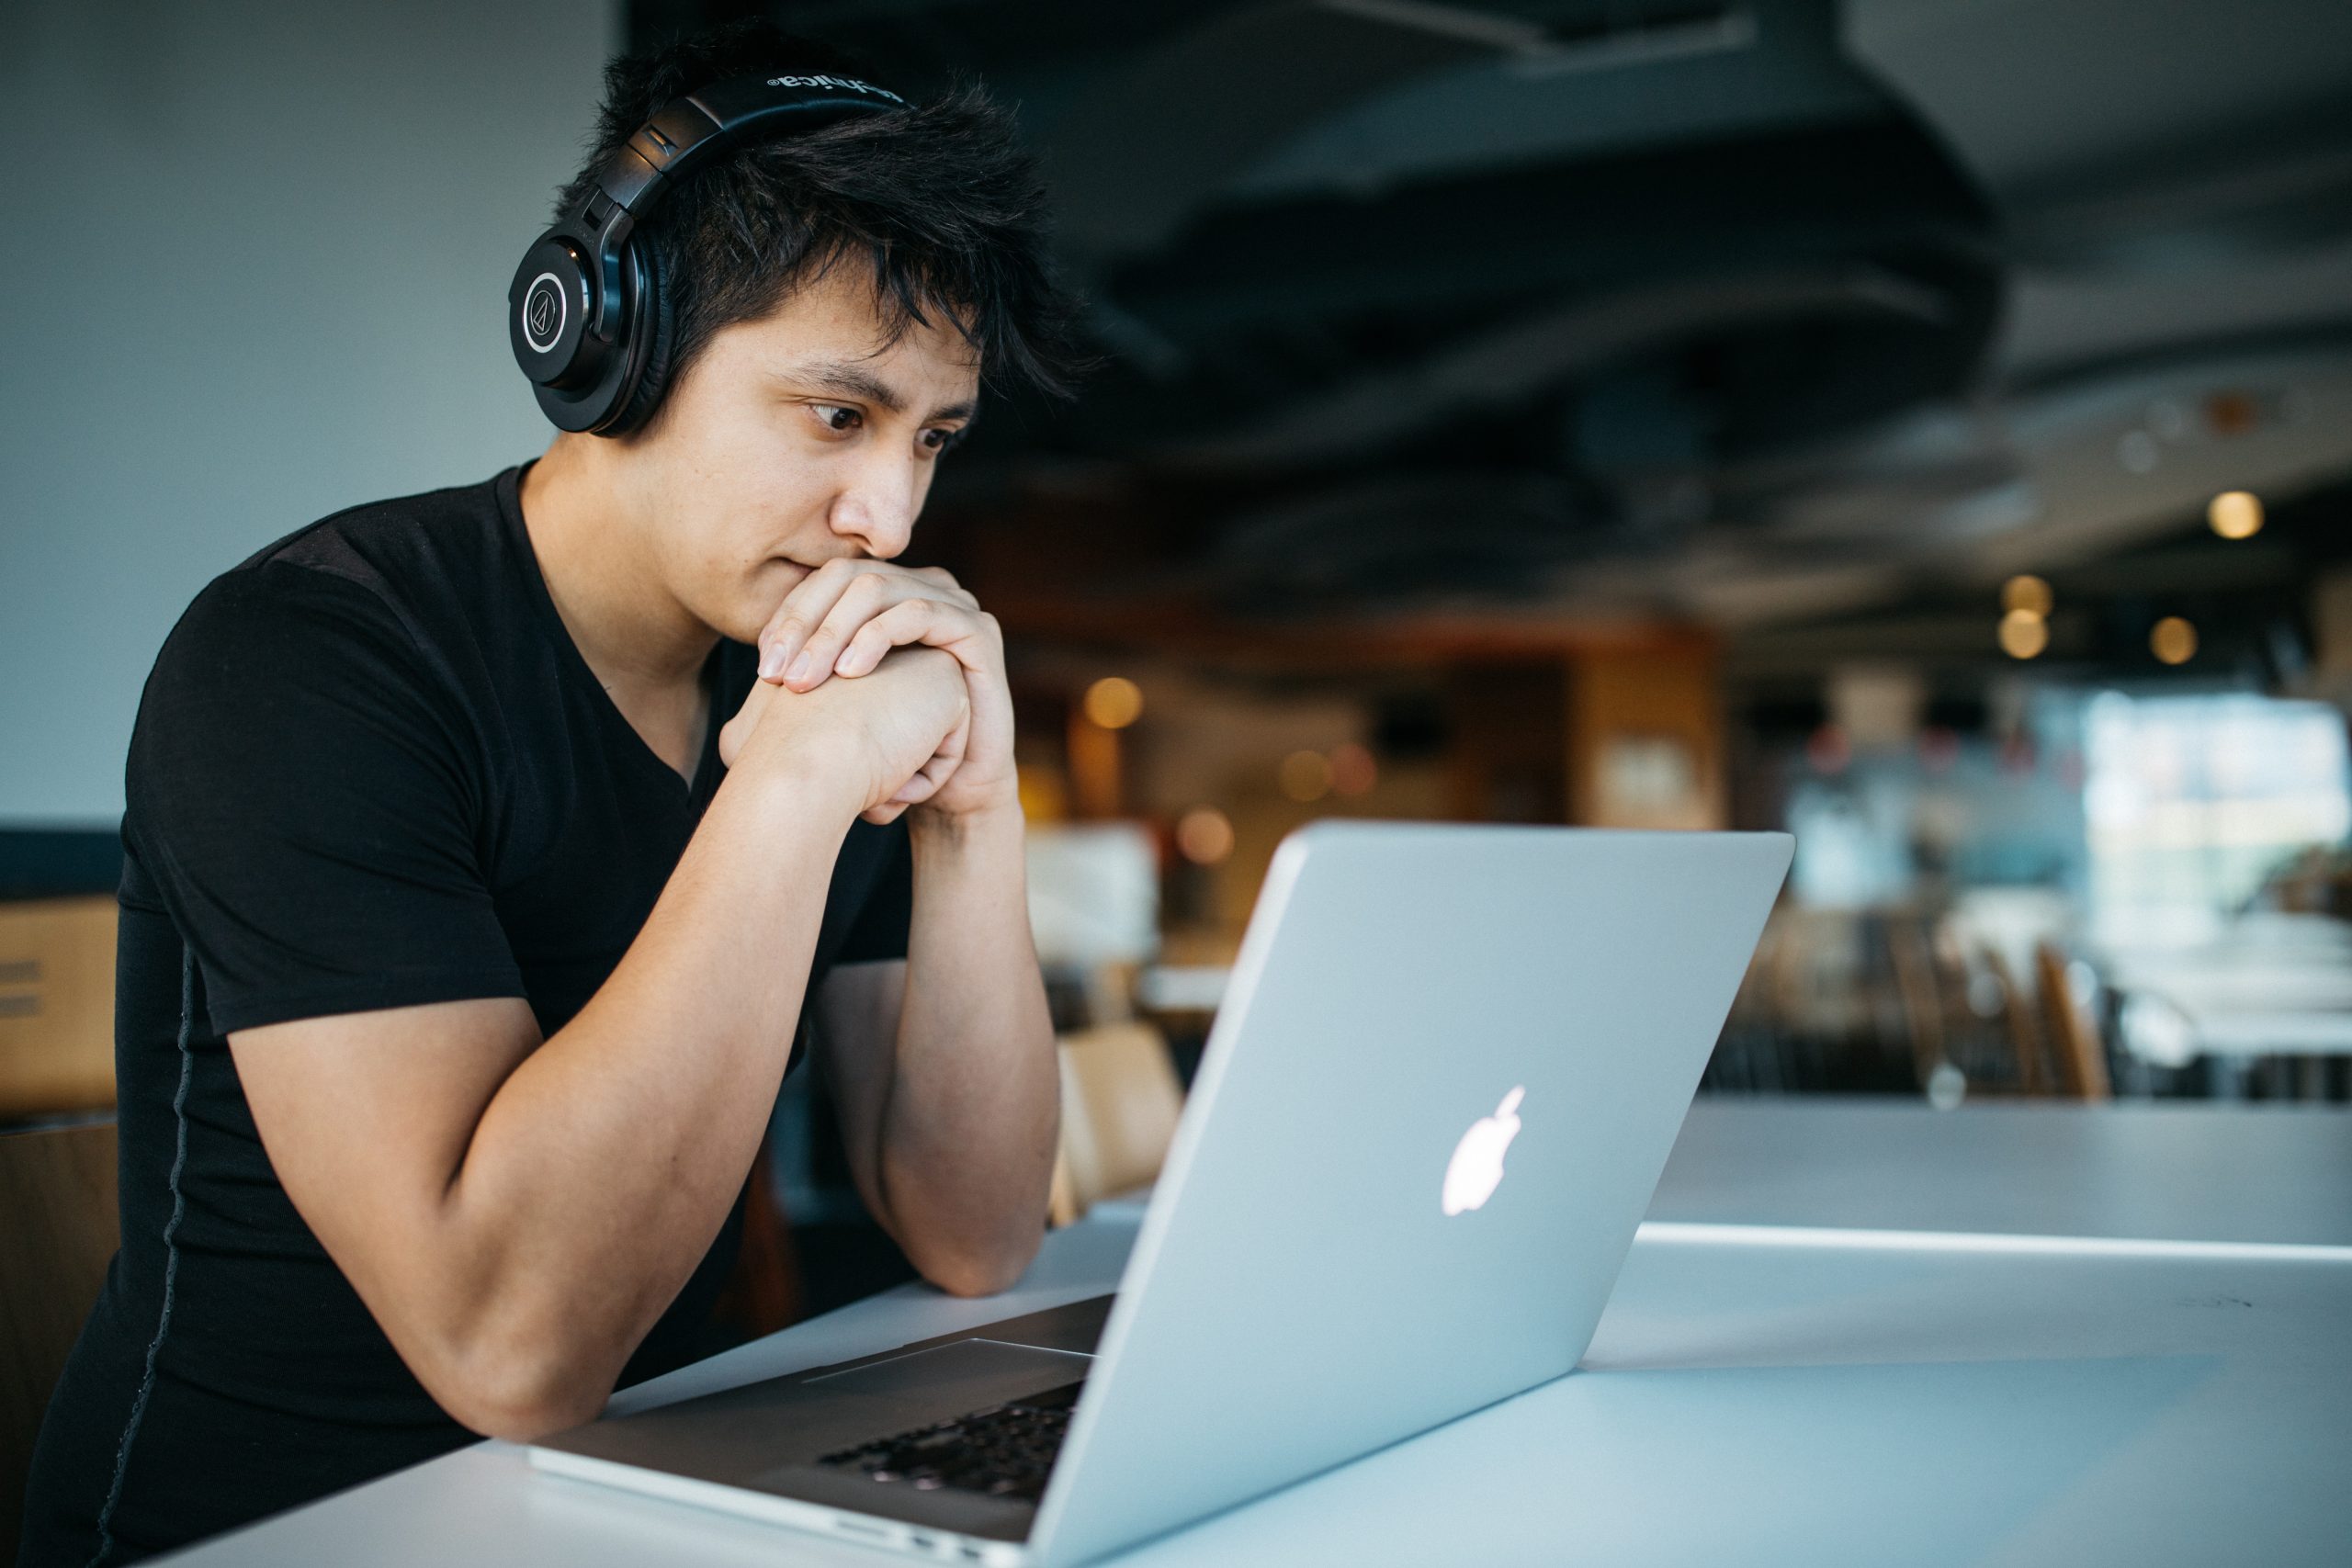 Focused man with headphones using laptop in a modern workspace.